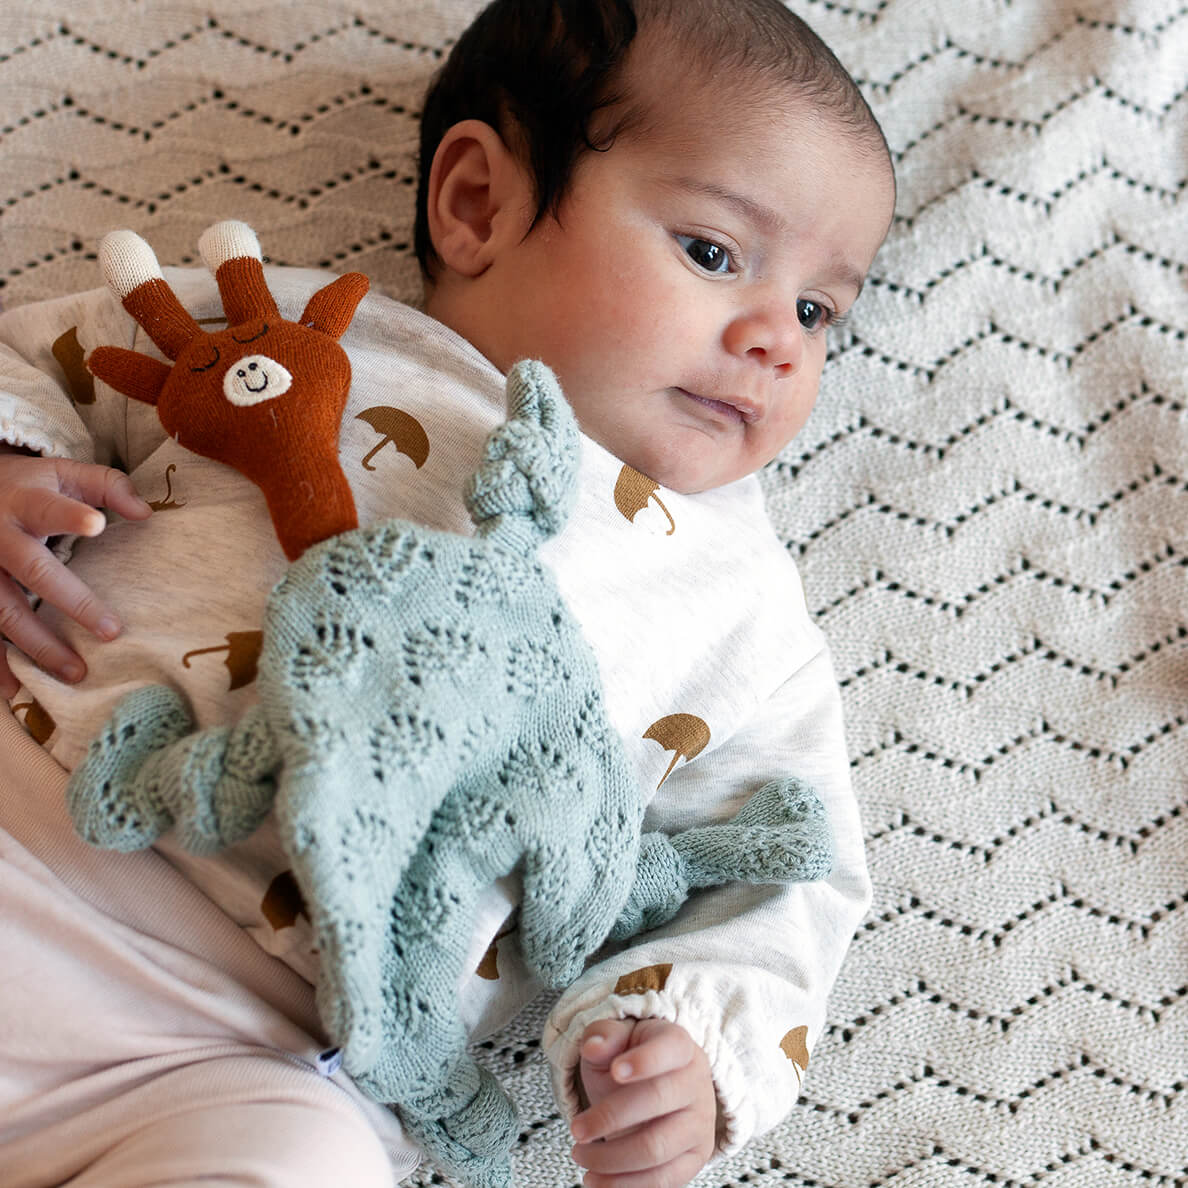 Giraffe Textured Comforter | Soft Toy | by Sophie Home - Lifestory - Sophie Home